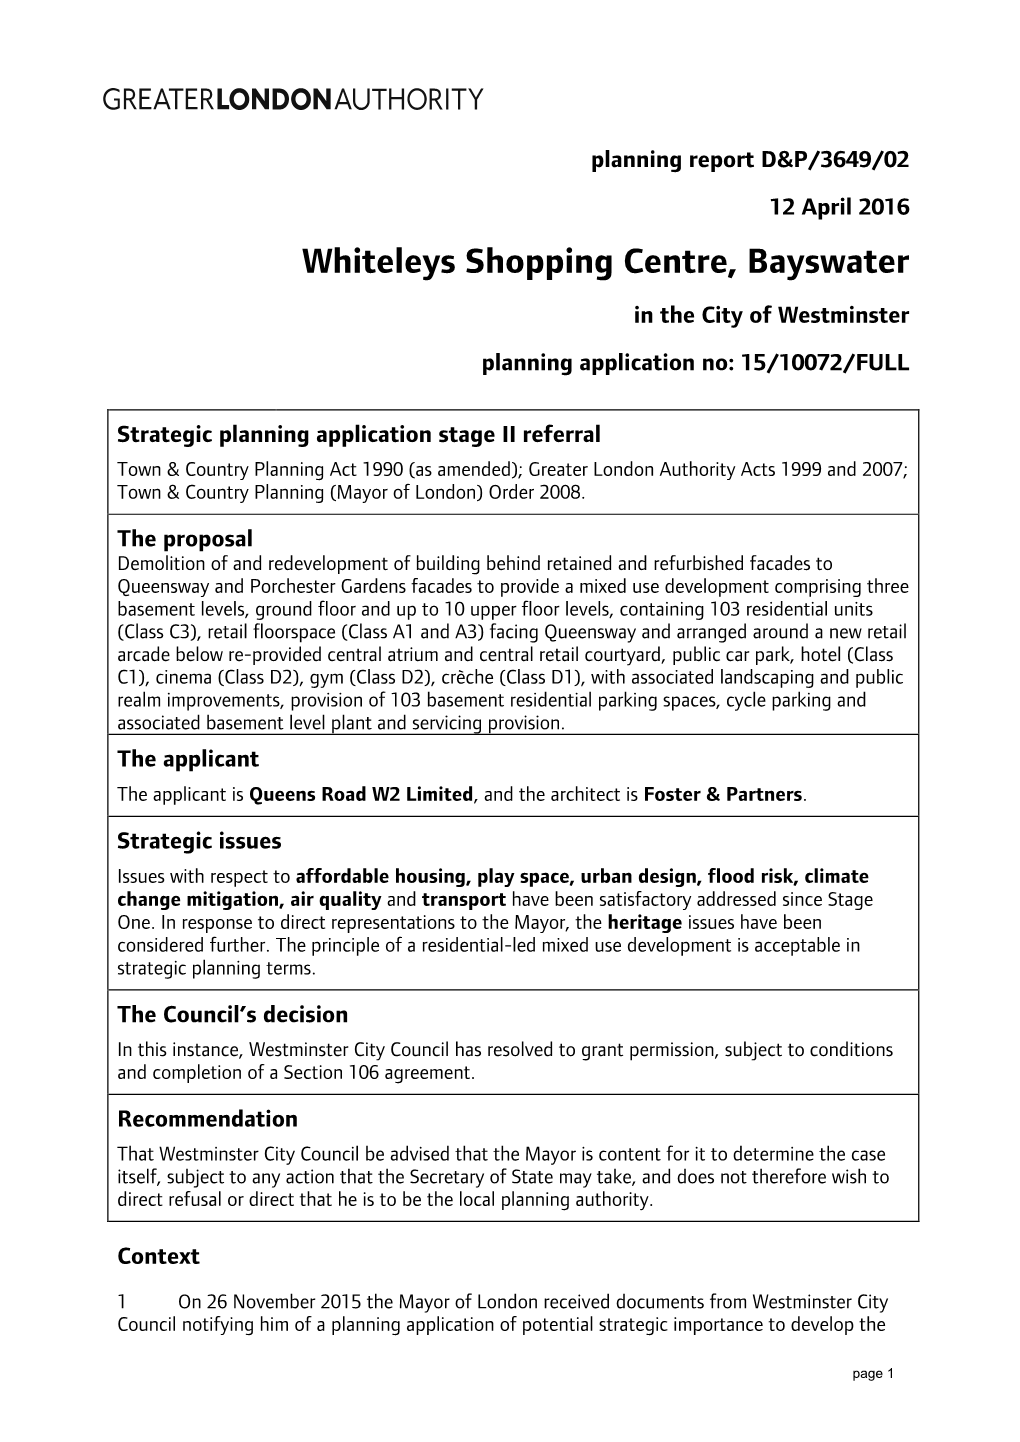 Whiteleys Shopping Centre, Bayswater in the City of Westminster Planning Application No: 15/10072/FULL